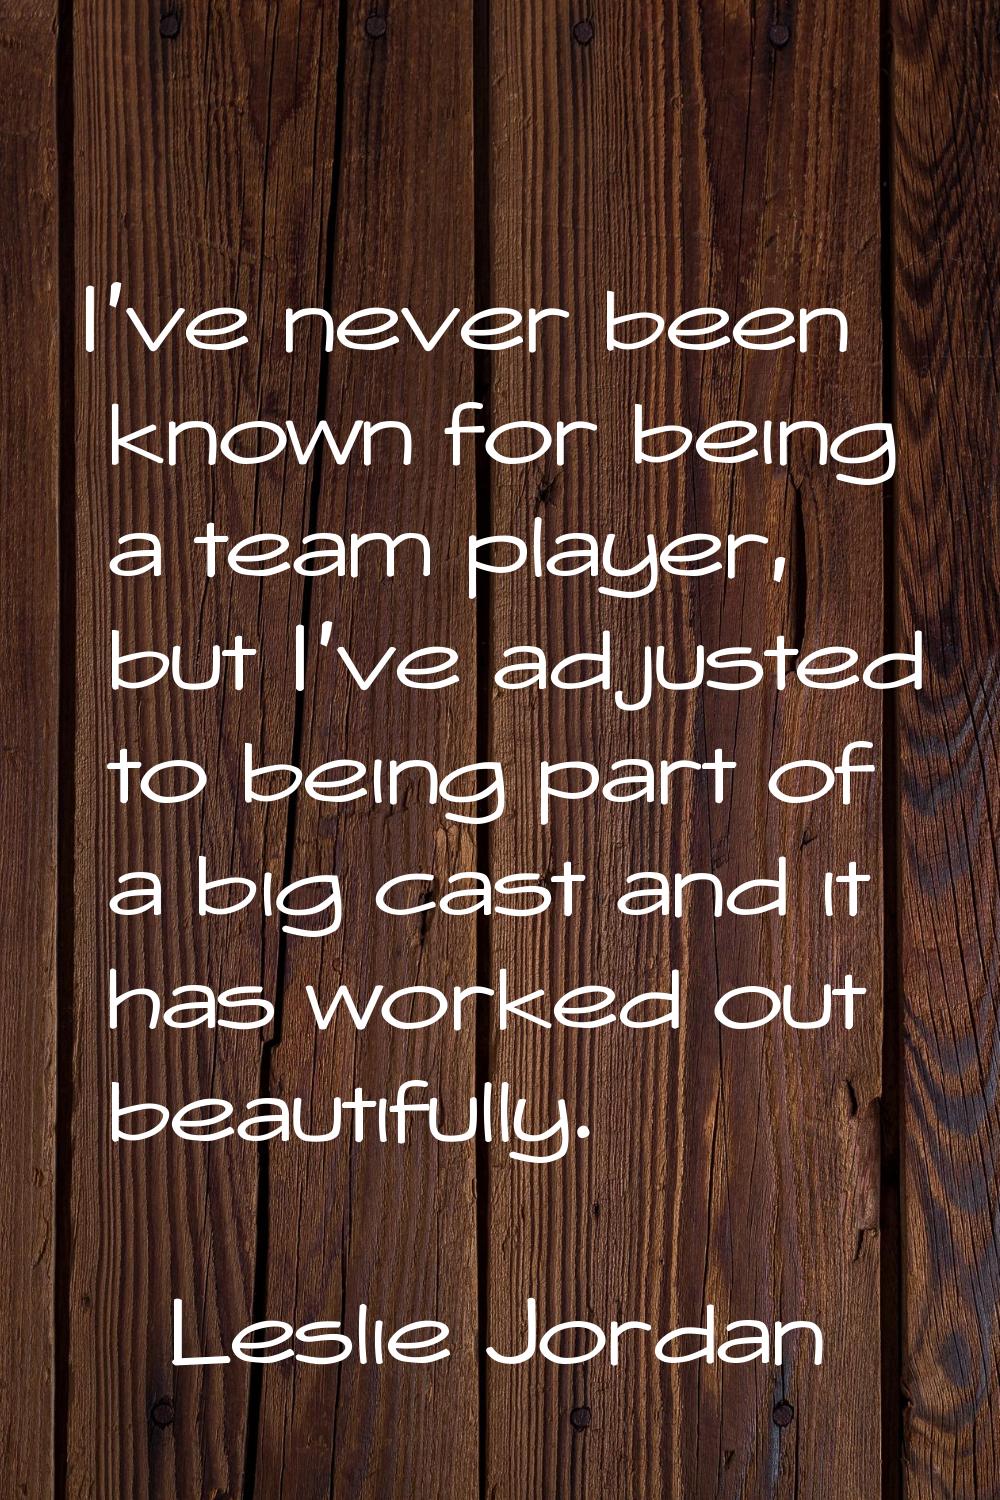 I've never been known for being a team player, but I've adjusted to being part of a big cast and it